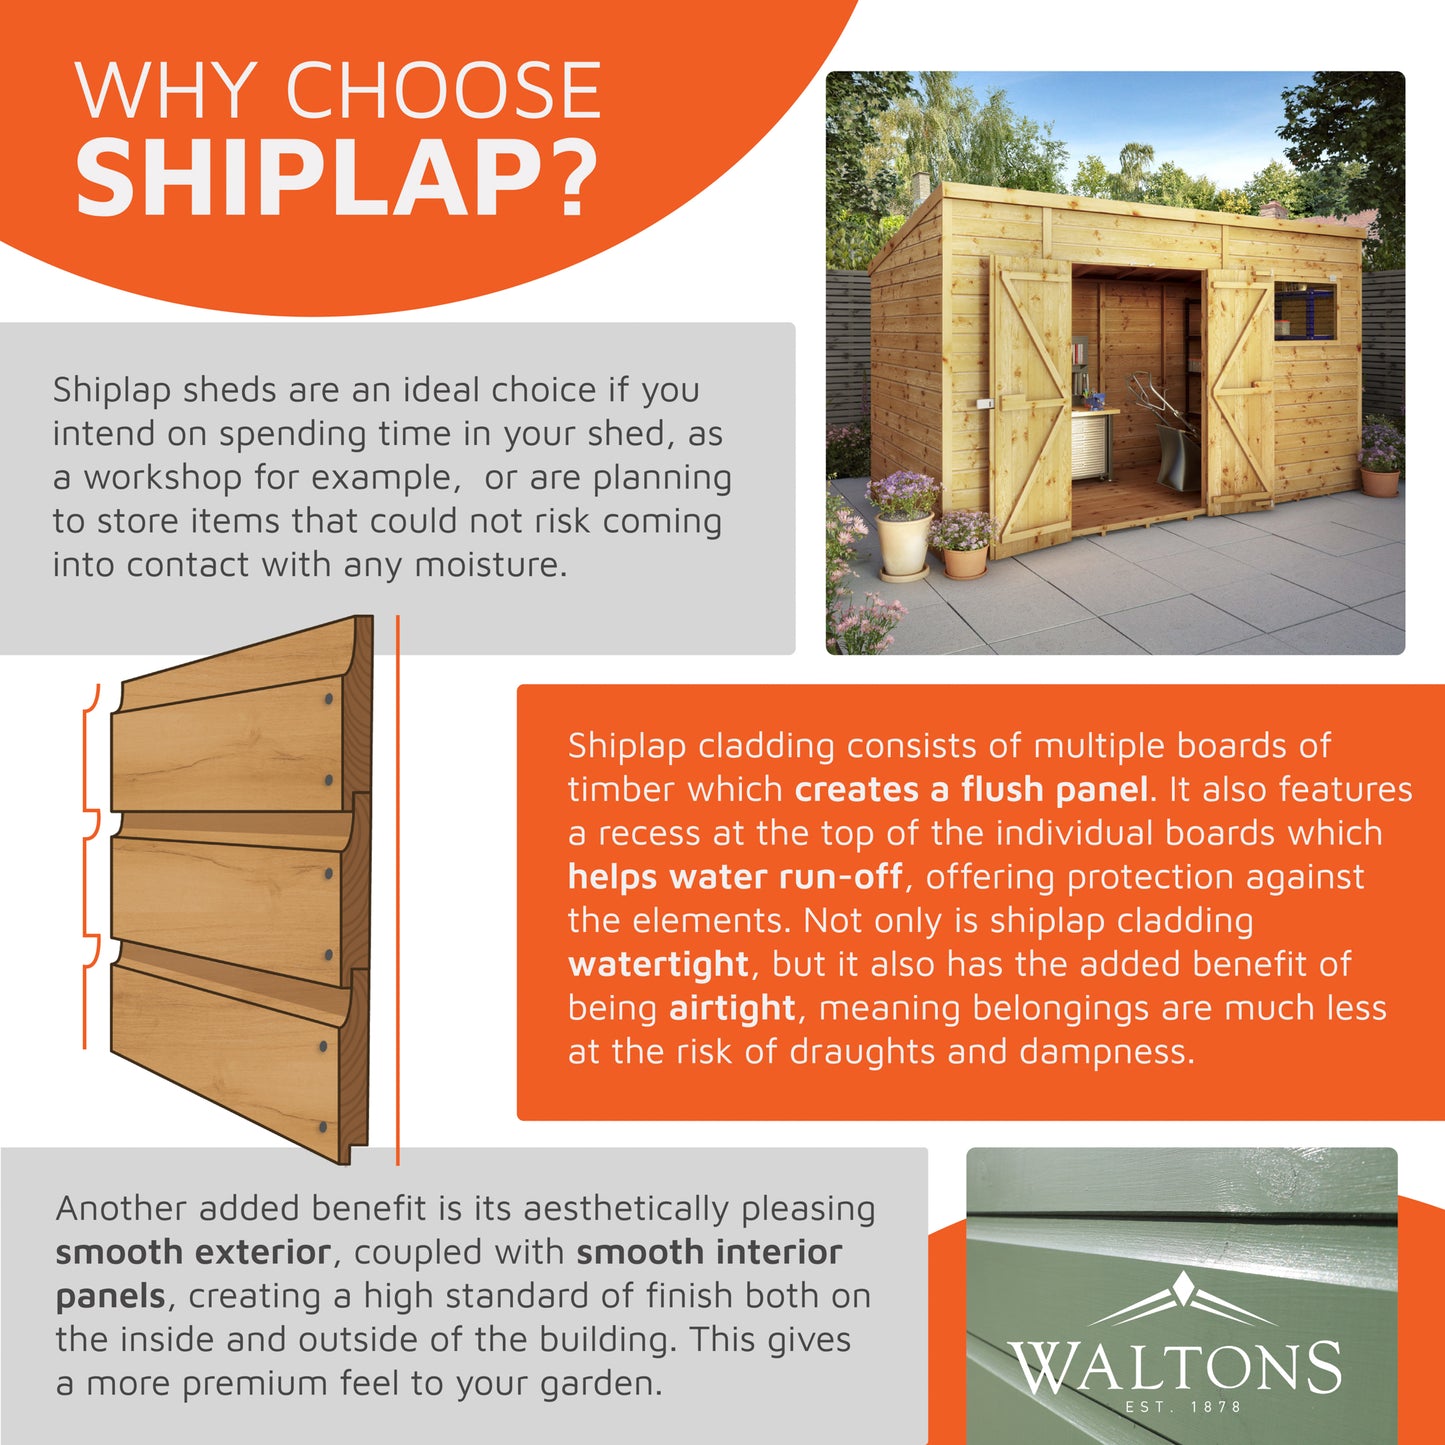 7 x 5 Shiplap Reverse Apex Windowless Wooden Shed